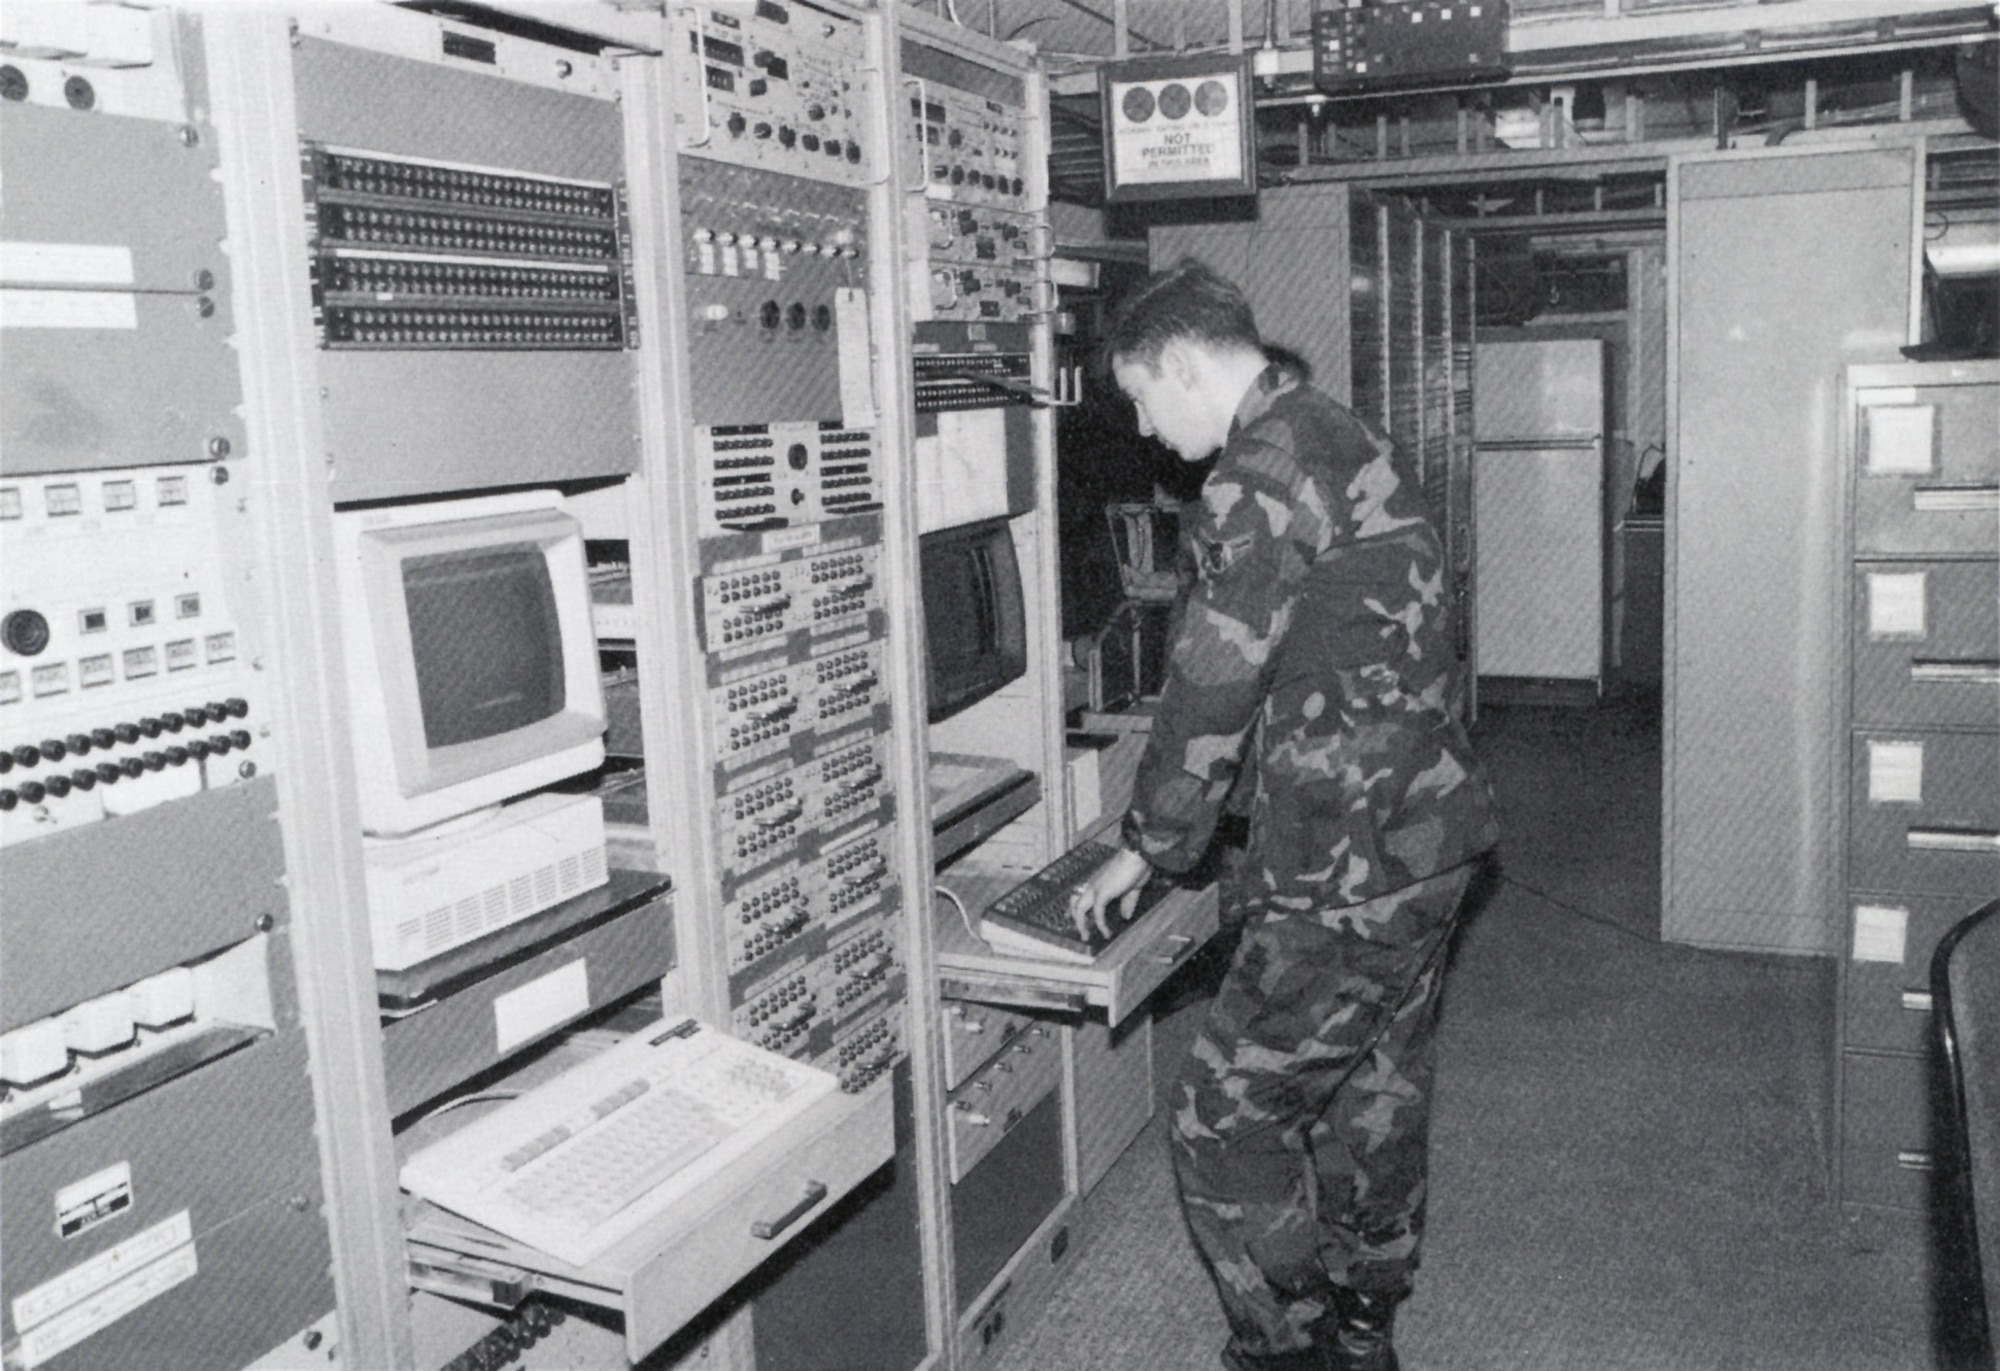 A1C Mark Williams checks the status of Digital European Backbone remote unmanned sites using transmission monitoring and control equipment, Europe.